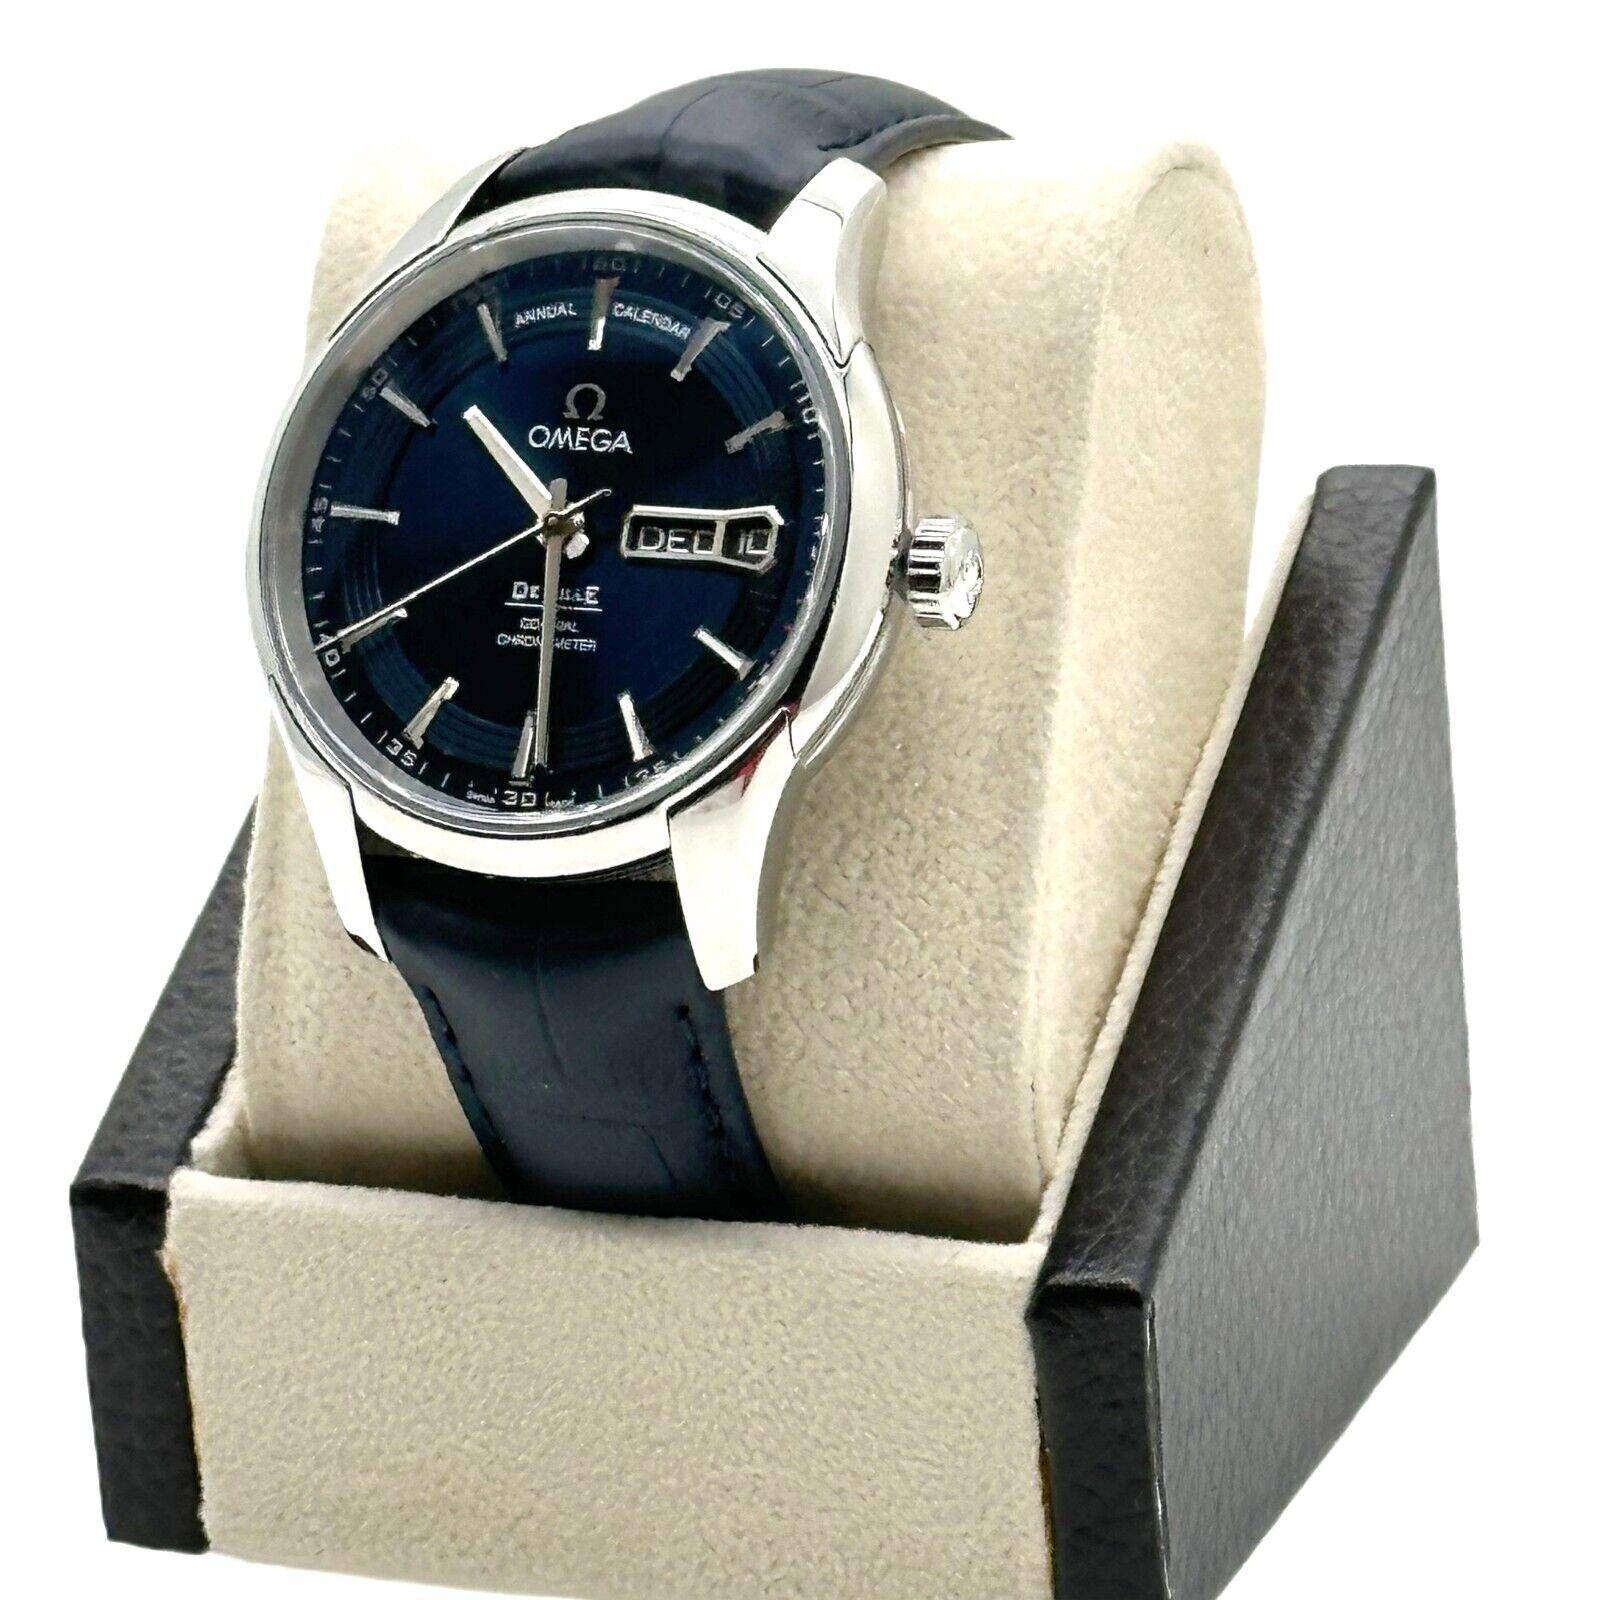 Style Number: 431.33.41.22.03.001

Model: De Ville Hour Vision Annual Calendar 

Case Material: Stainless Steel 

Band: Blue Leather

Bezel:  Stainless Steel 

Dial: Blue

Face: Sapphire Crystal 

Case Size: 41mm 

Includes: 

-Omega Travel